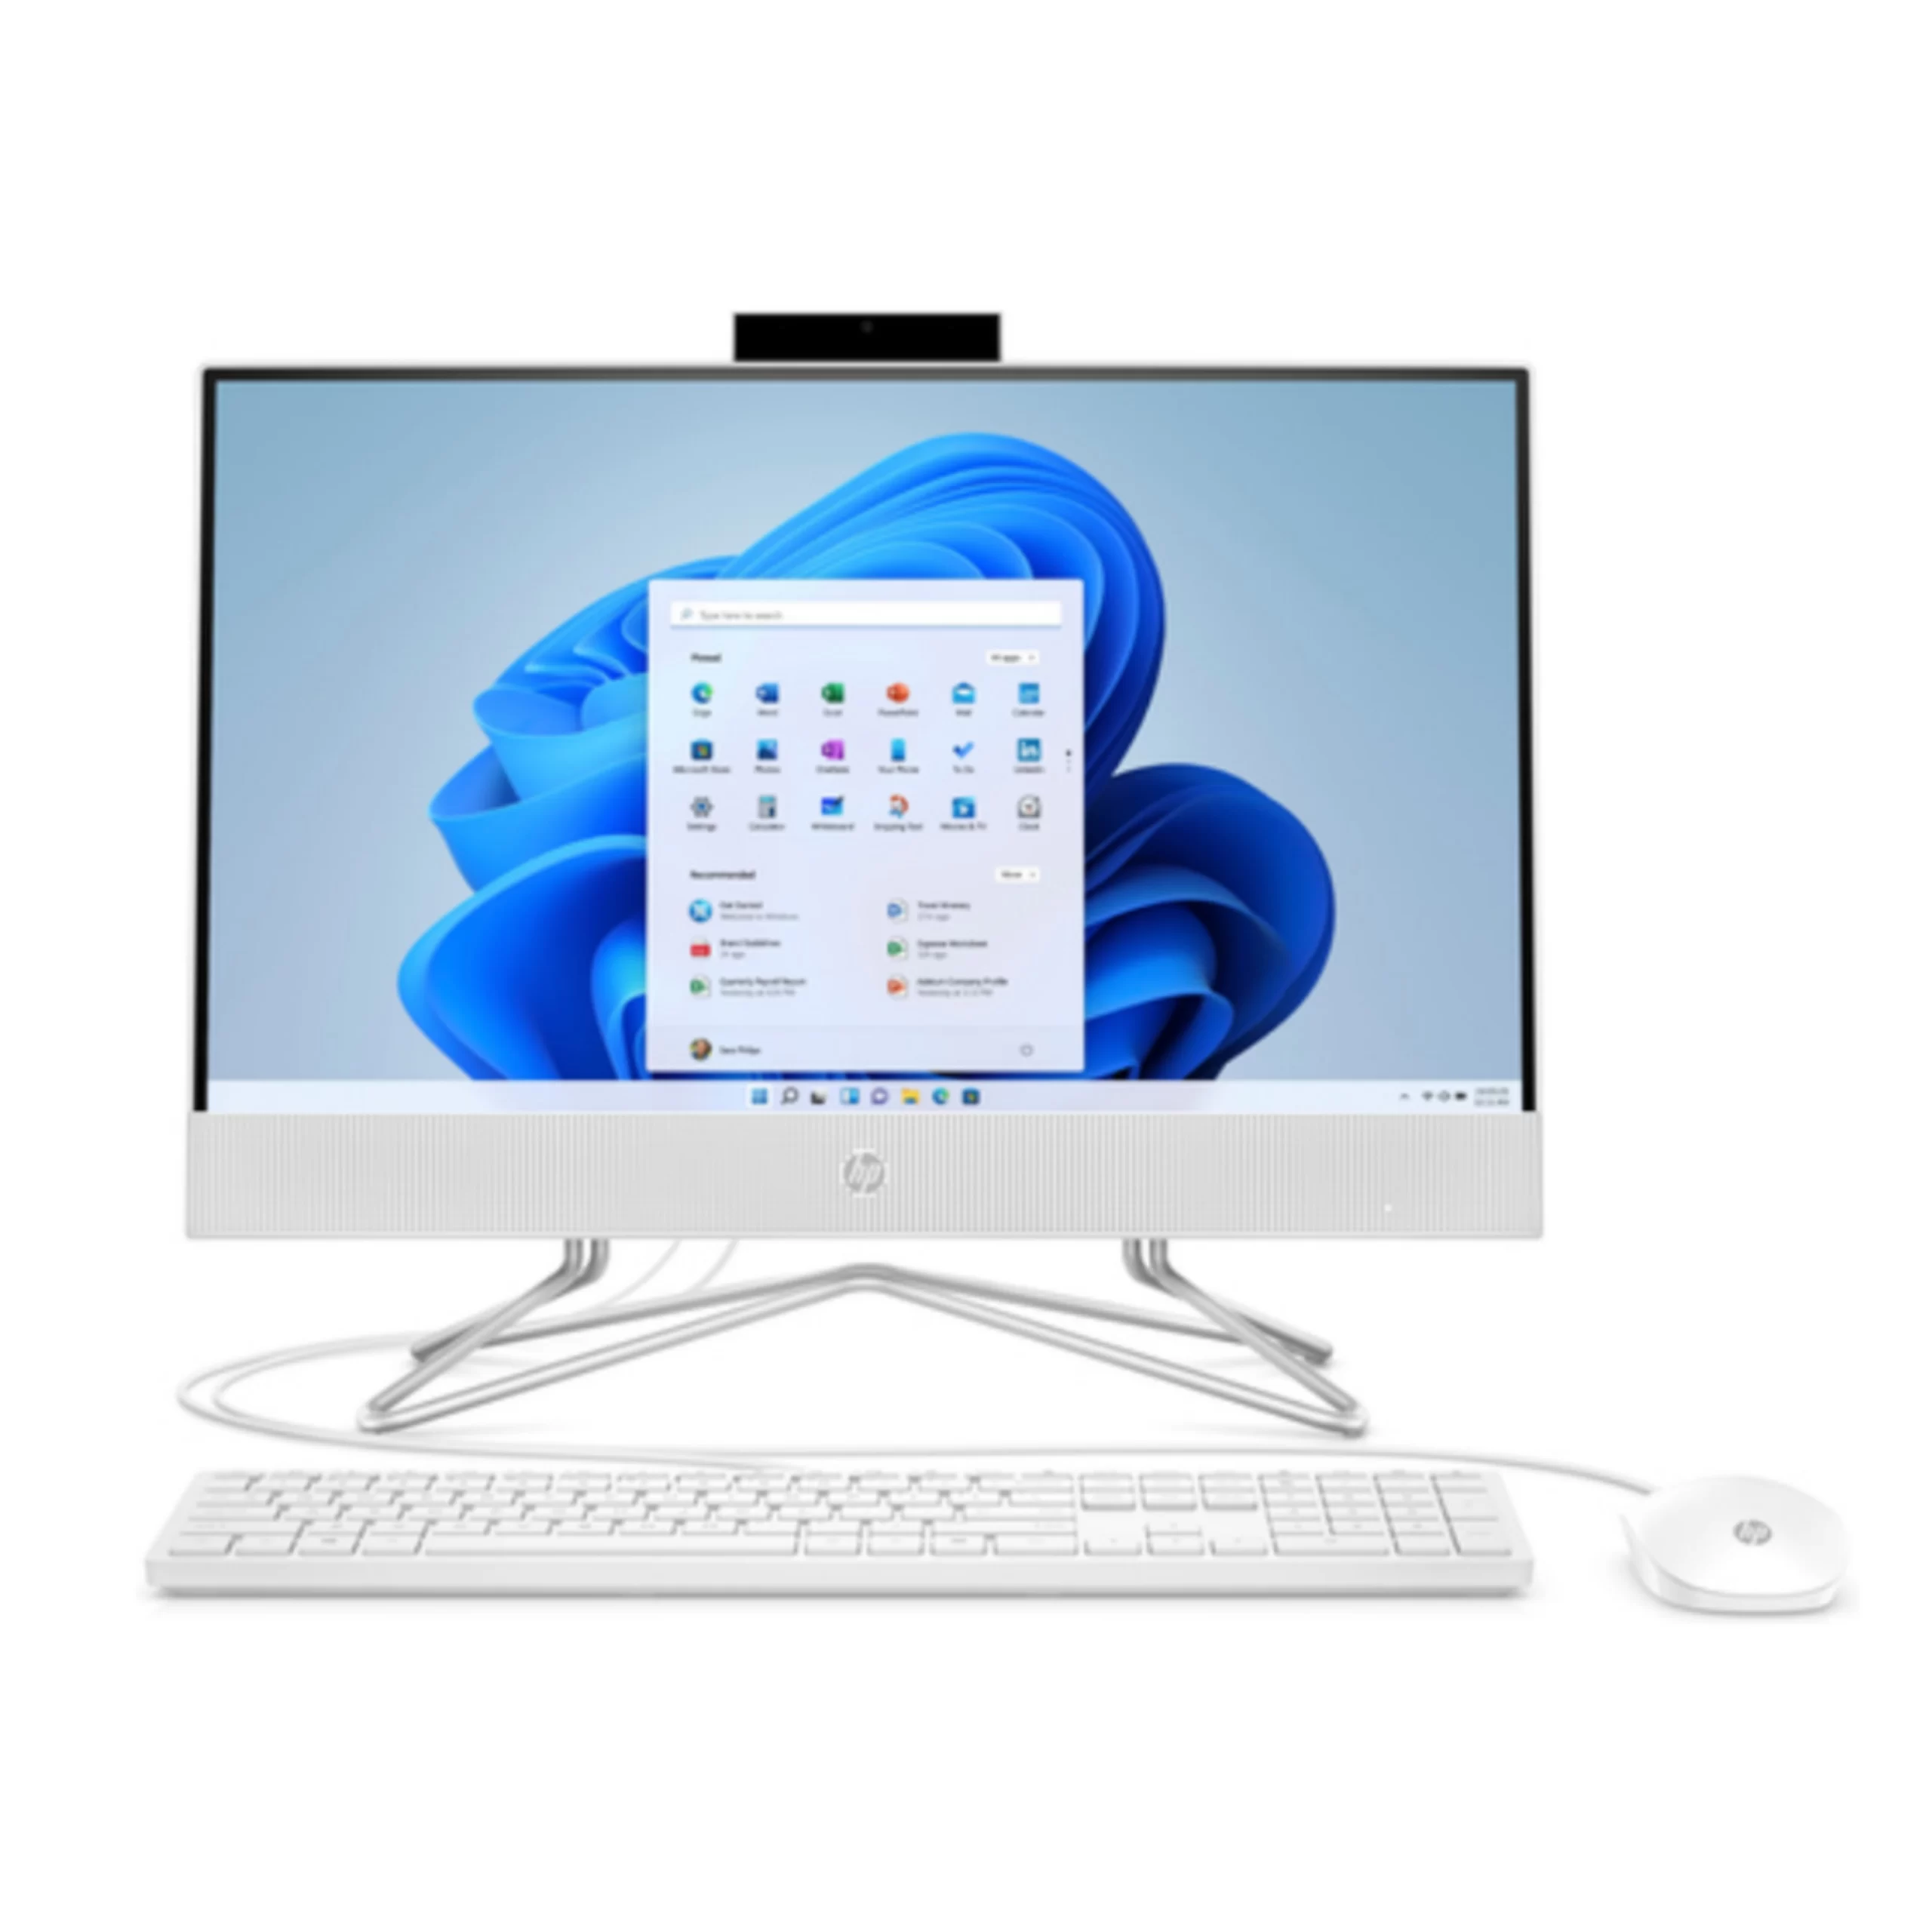 Hp pro 200 G4 All in One core i3